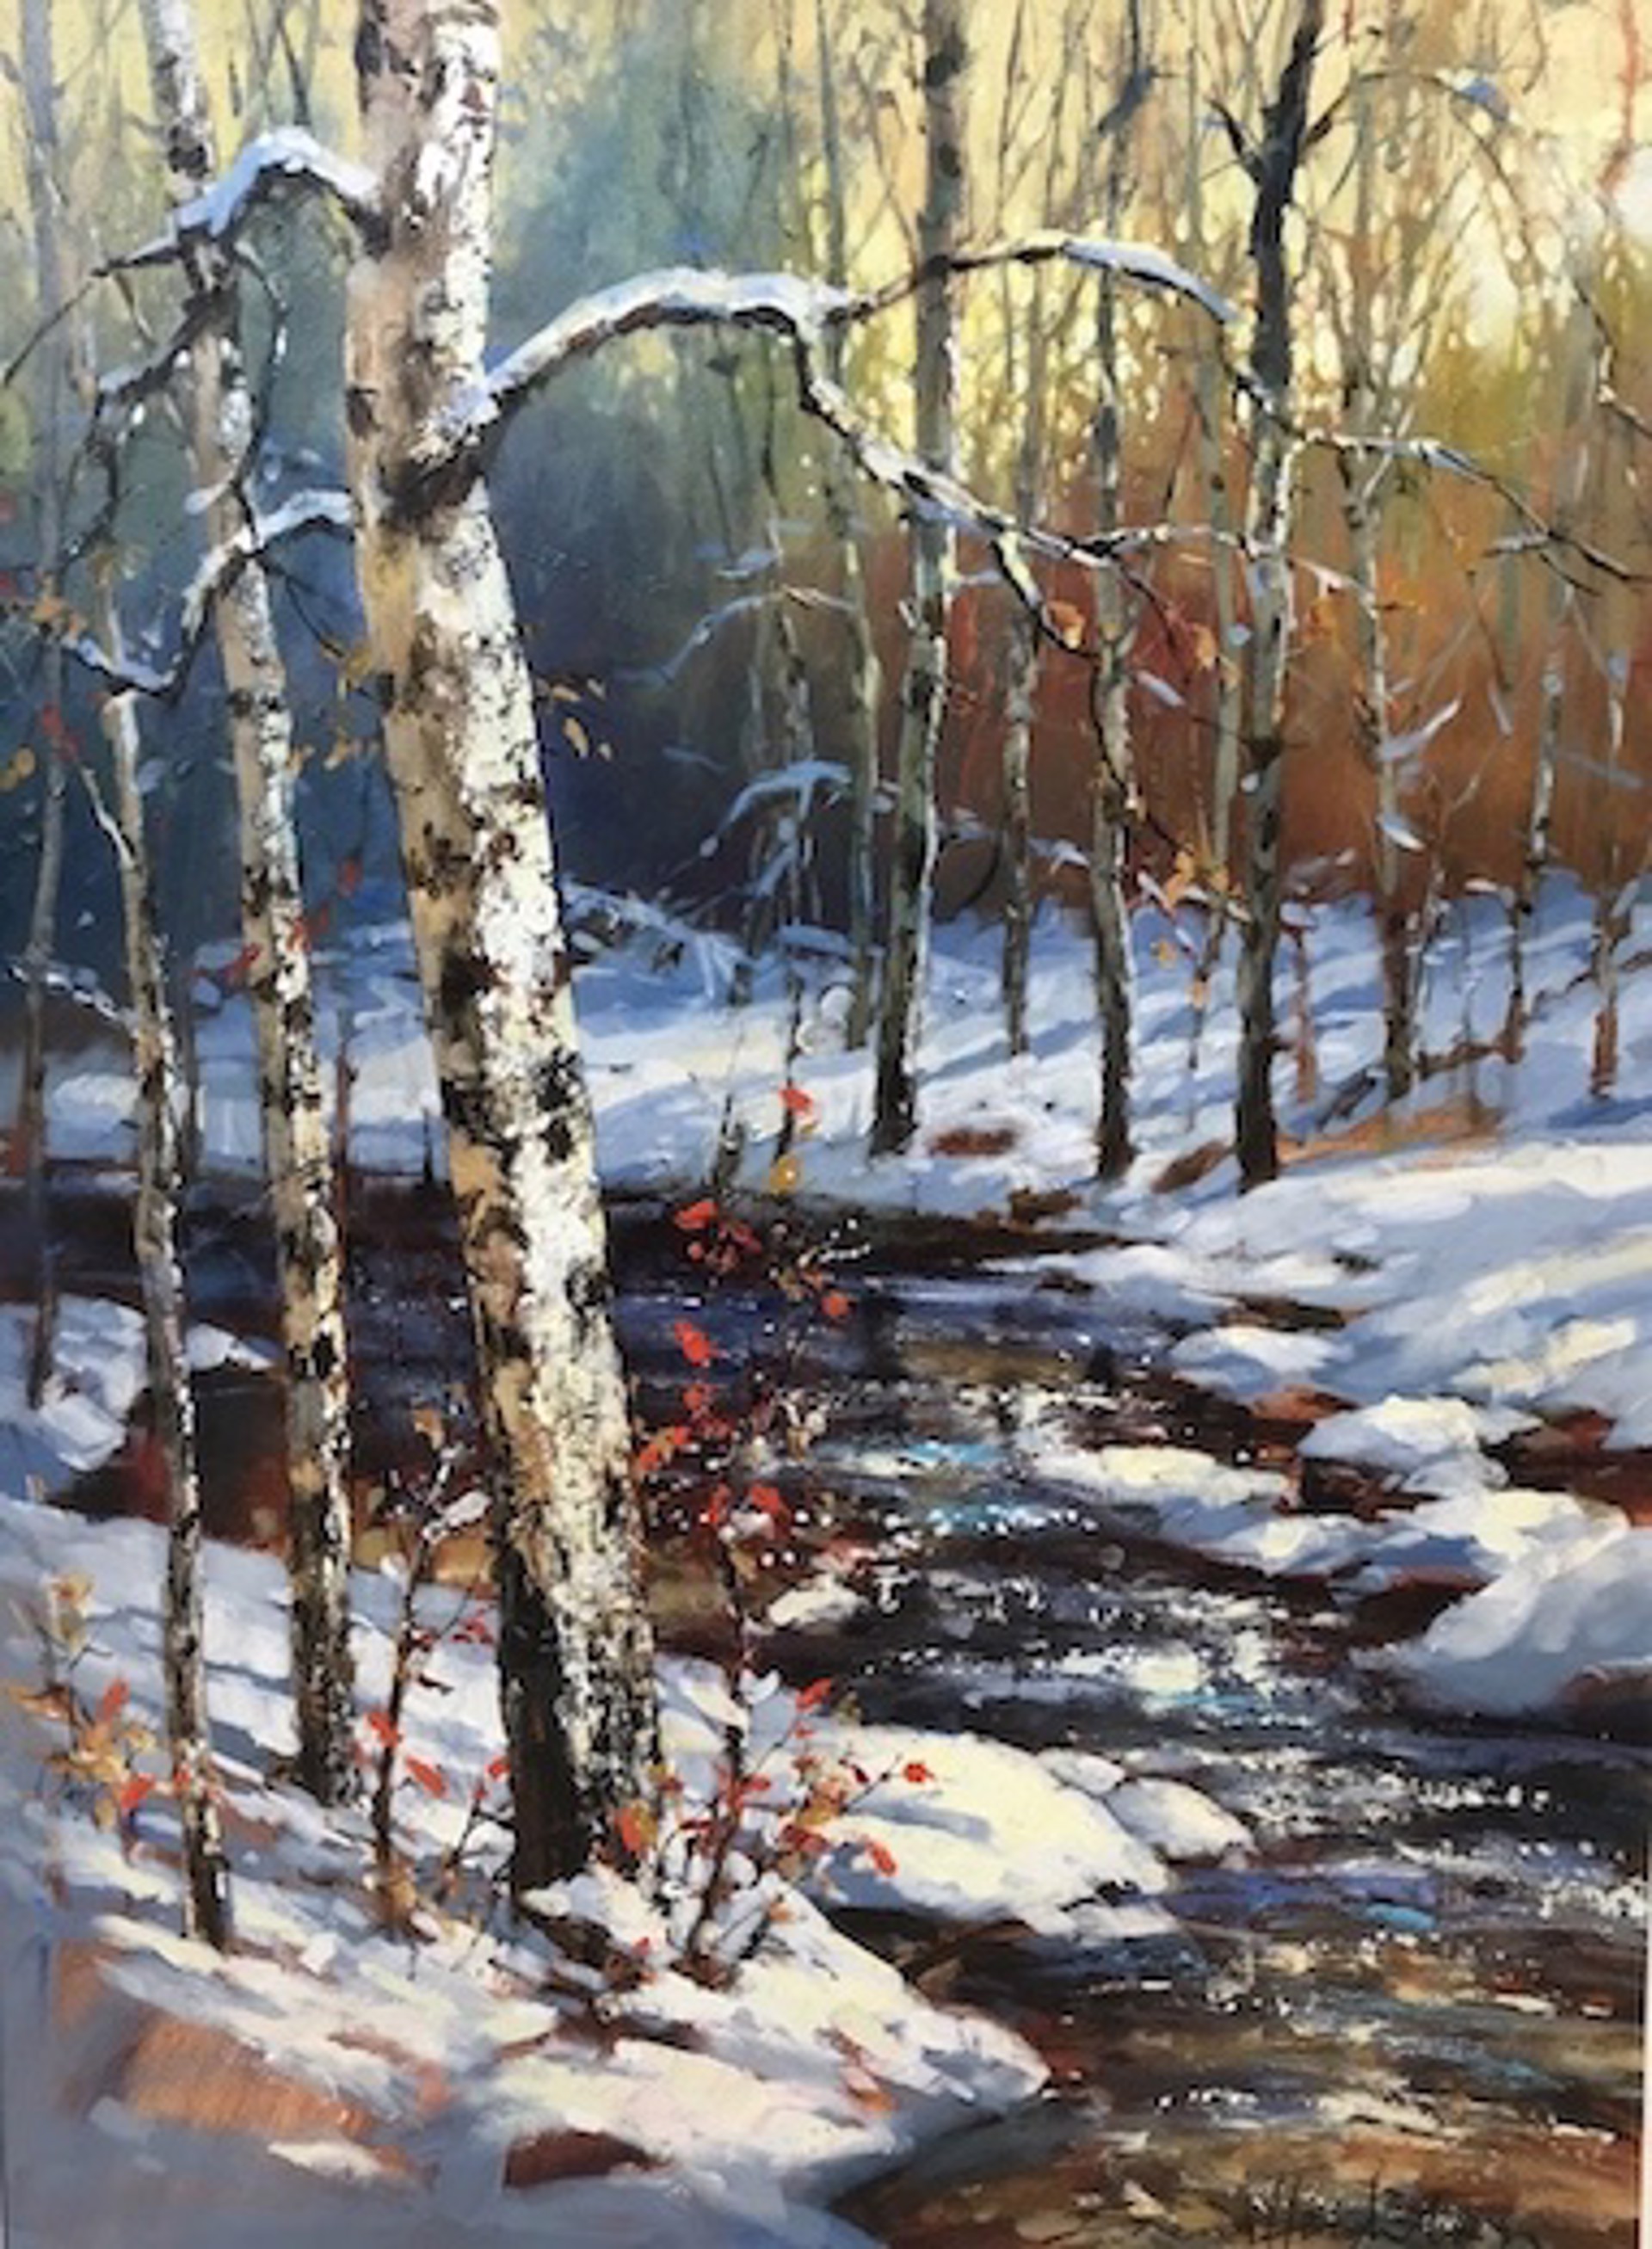 Catching the Light by Brent Heighton